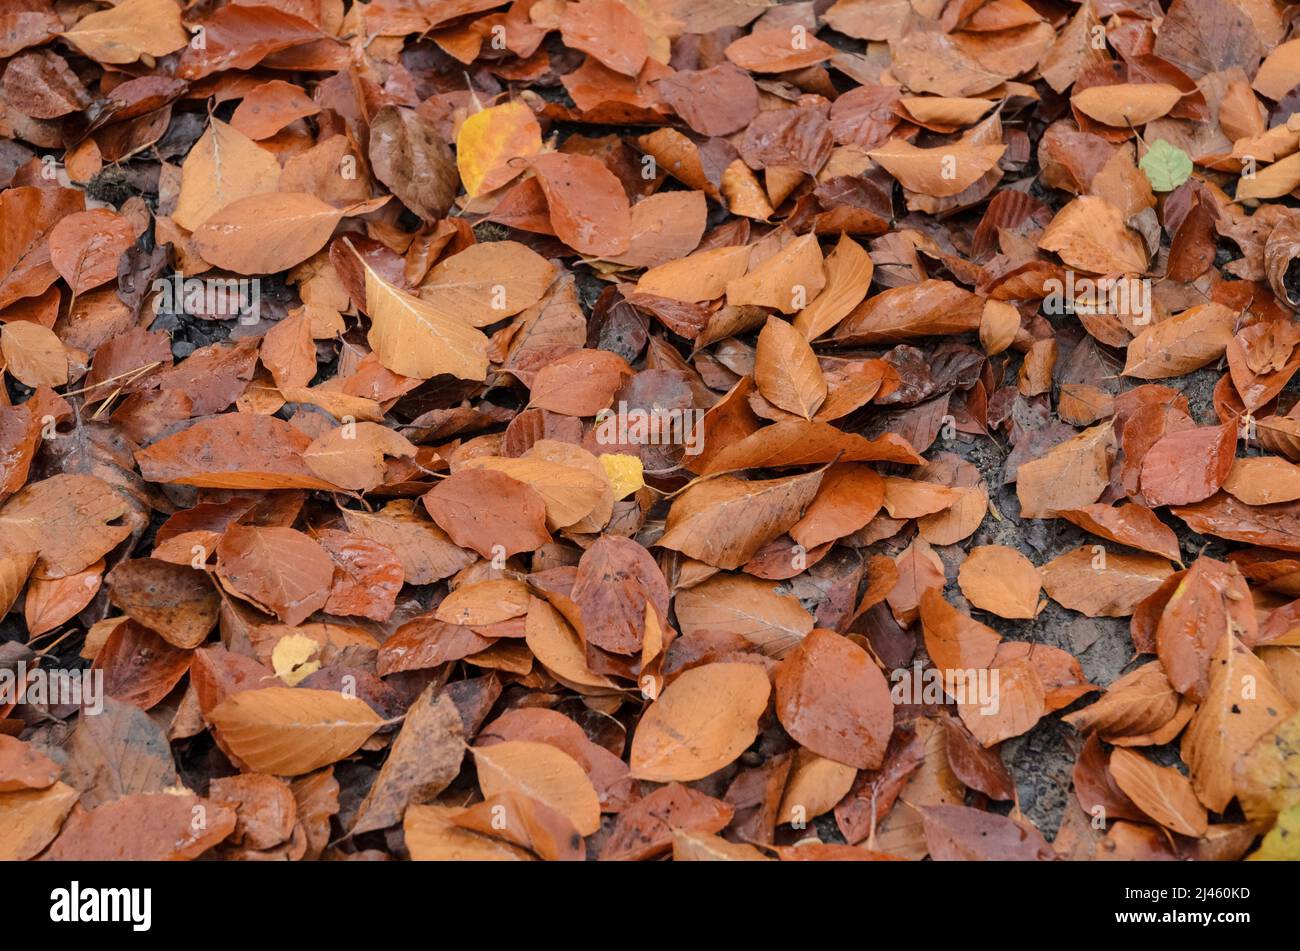 Wet brown leaves of the Fagus sylvatica, also known as Common Beech or European Beech on the forest ground during autumn season Stock Photo